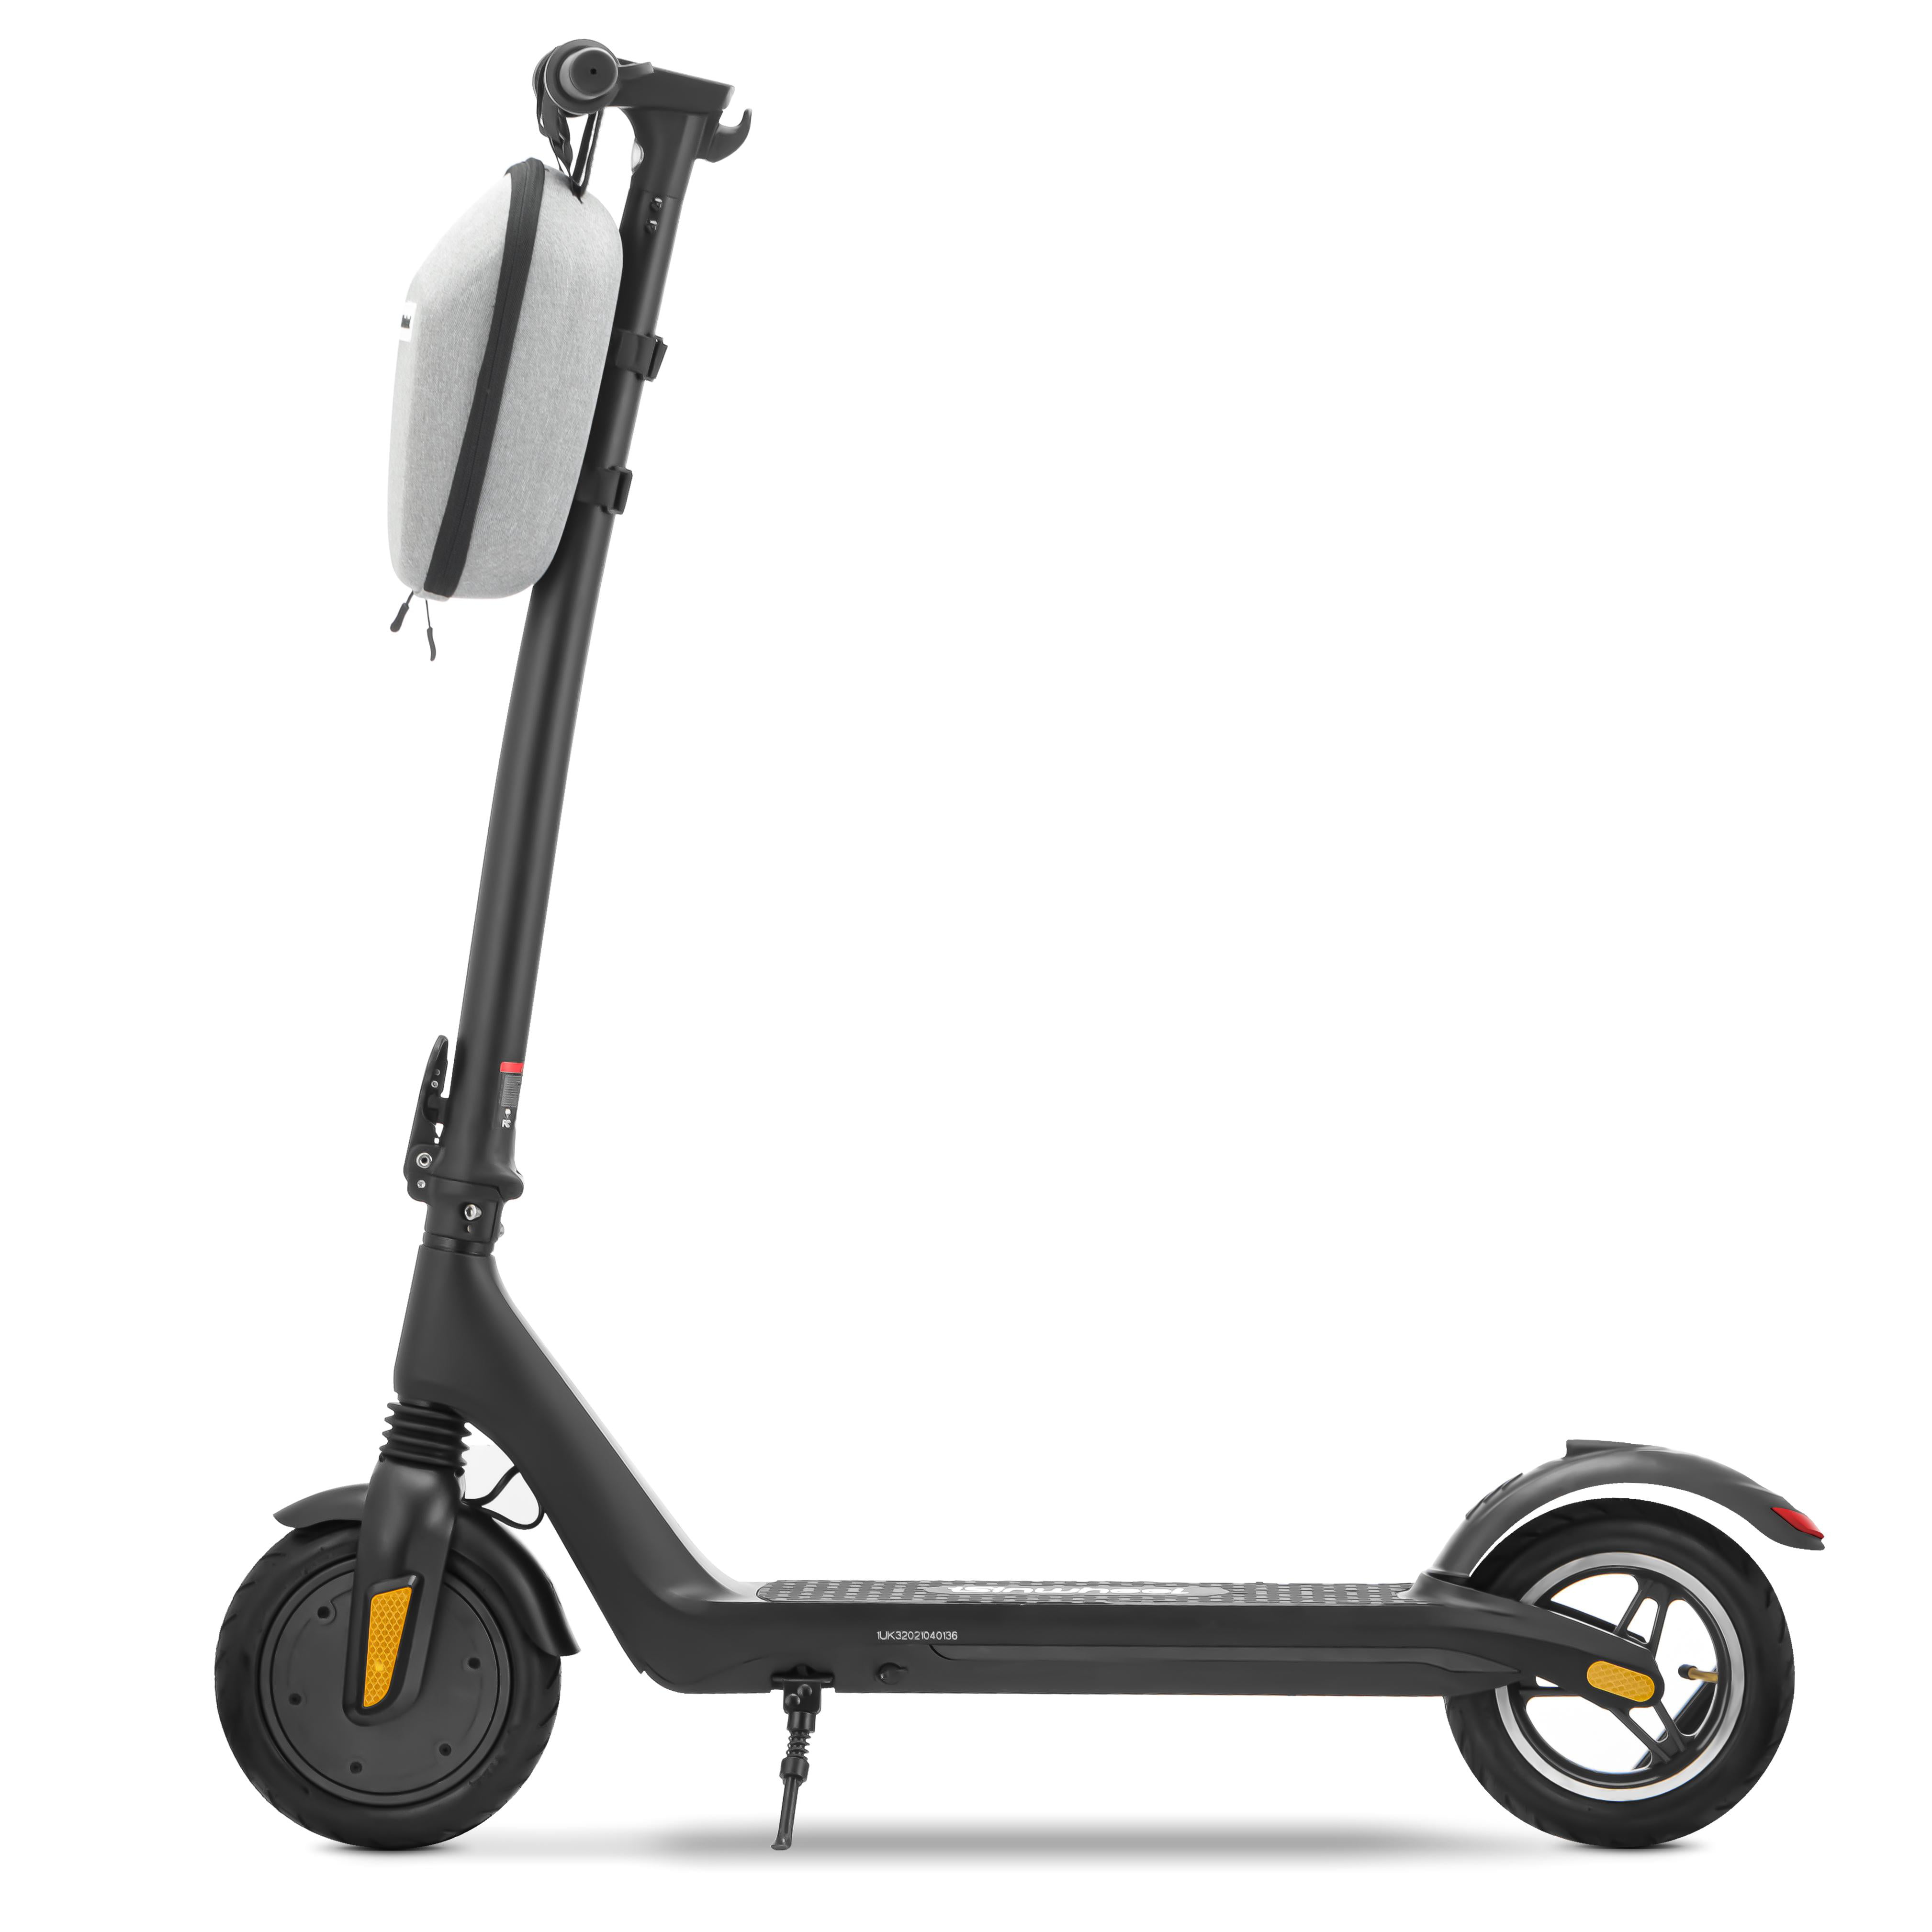 and 25km Long Range Comfortable and Portable Commuter Electric Scooter for Adults isinwheel i11 E Scooter with App Control 350W Motor Top Speed to 25km/h Electric Scooter